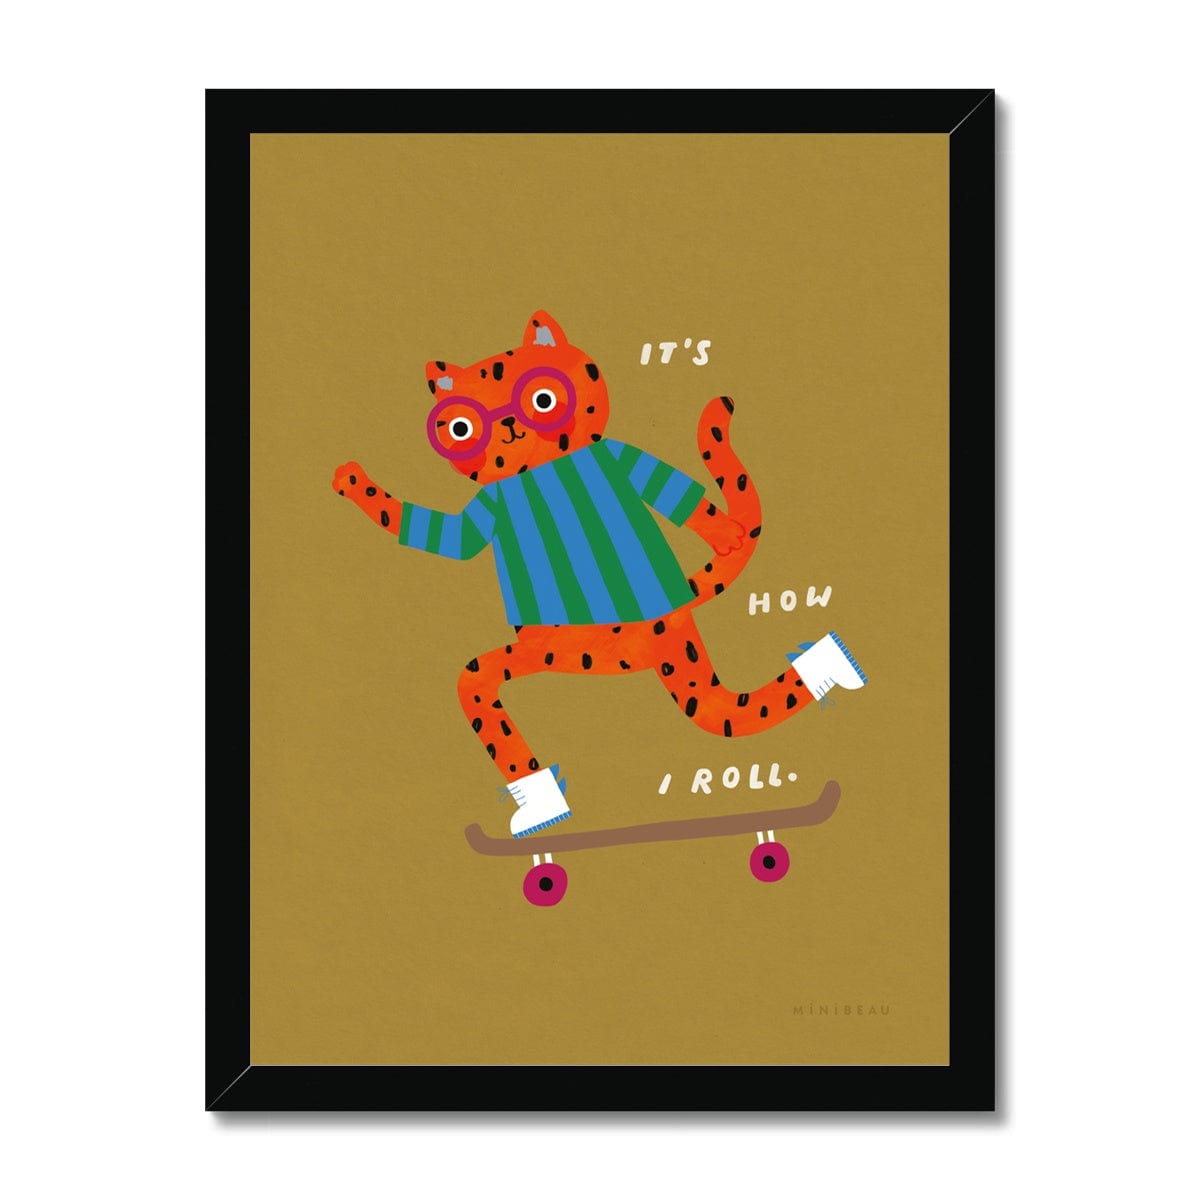 Art print in black frame. Our It's How I Roll Leopard Art Print features a skateboarding leopard in a green and blue jumper, red glasses and white high tops with the worlds IT'S HOW I ROLL on text on a gold/brown background.